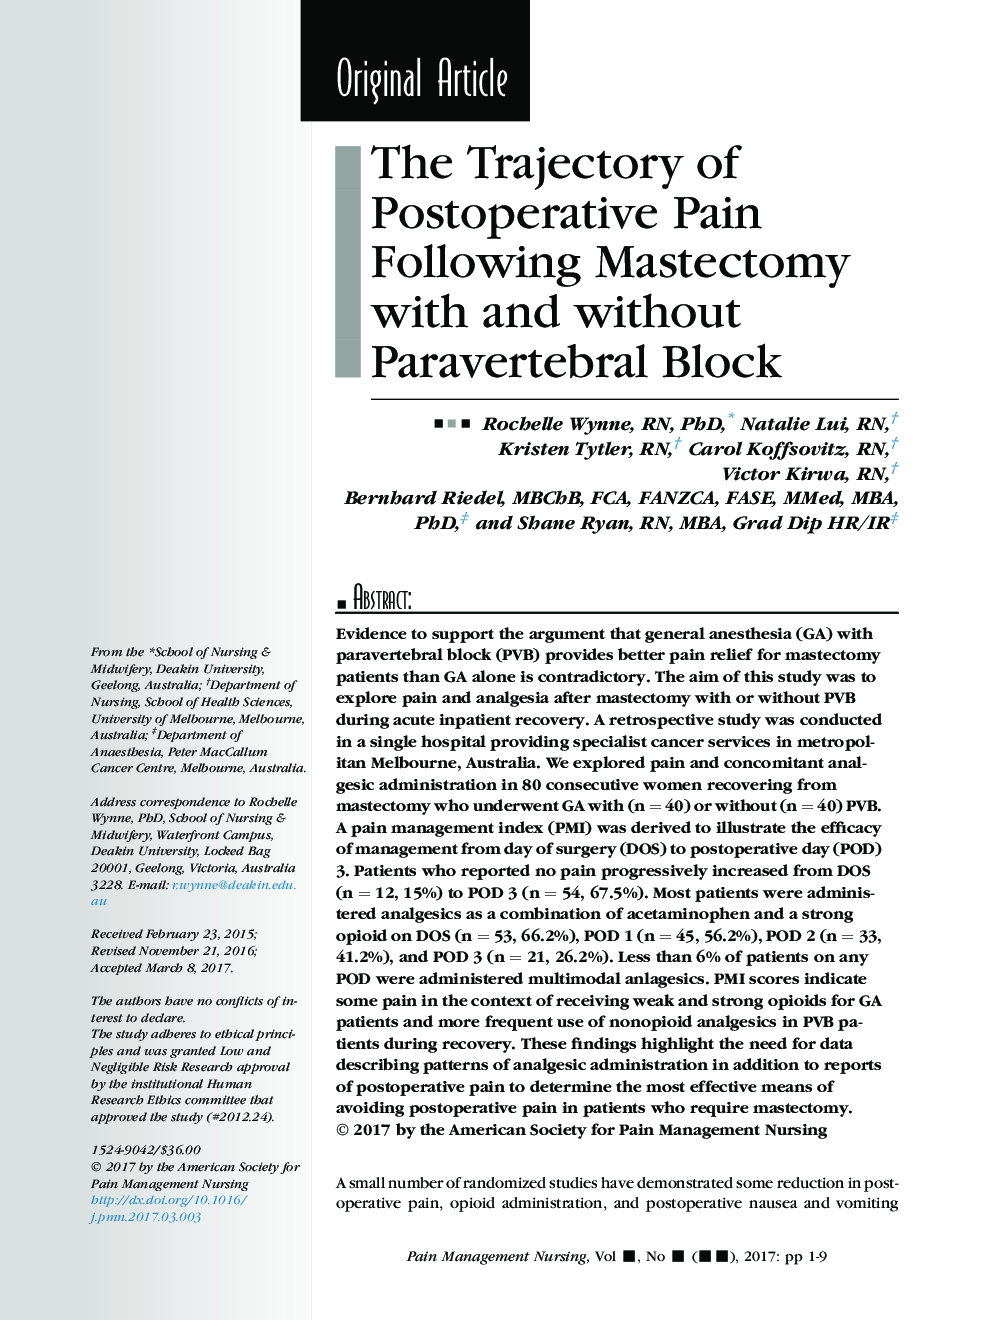 The Trajectory of Postoperative Pain Following Mastectomy with and without Paravertebral Block